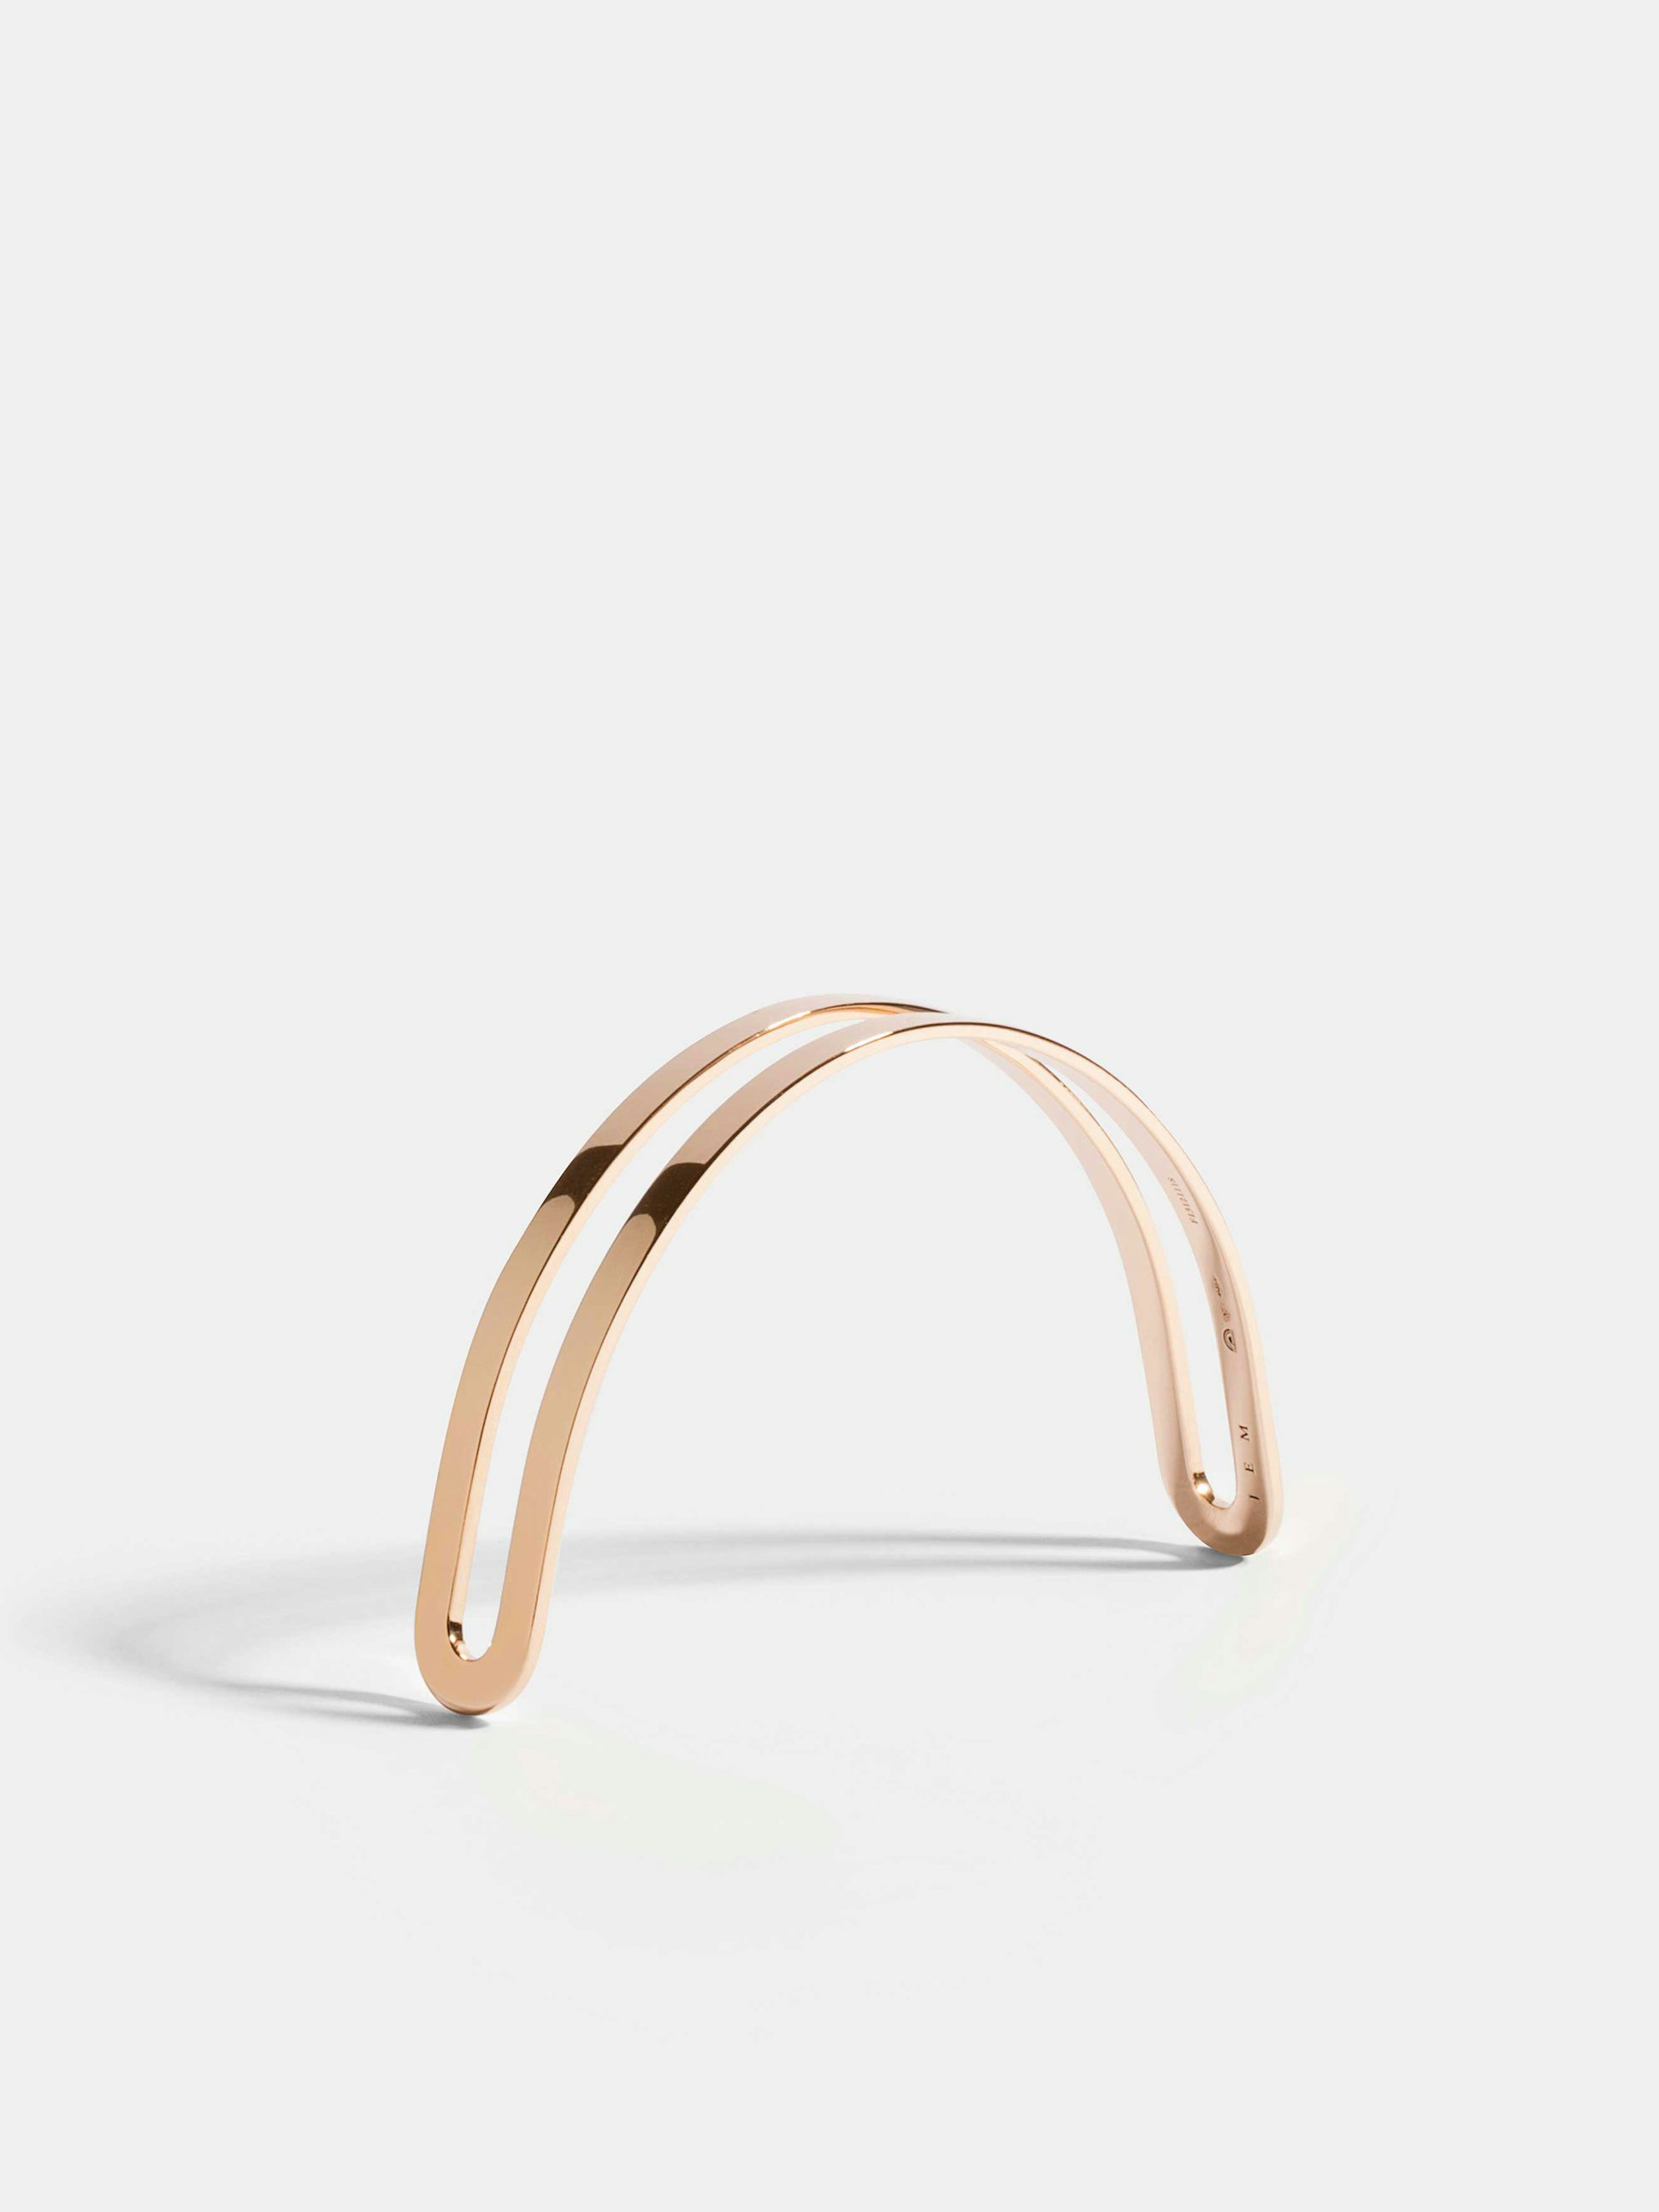 Étreintes simple half-bracelet in 18k Fairmined ethical rose gold with a polished finish.